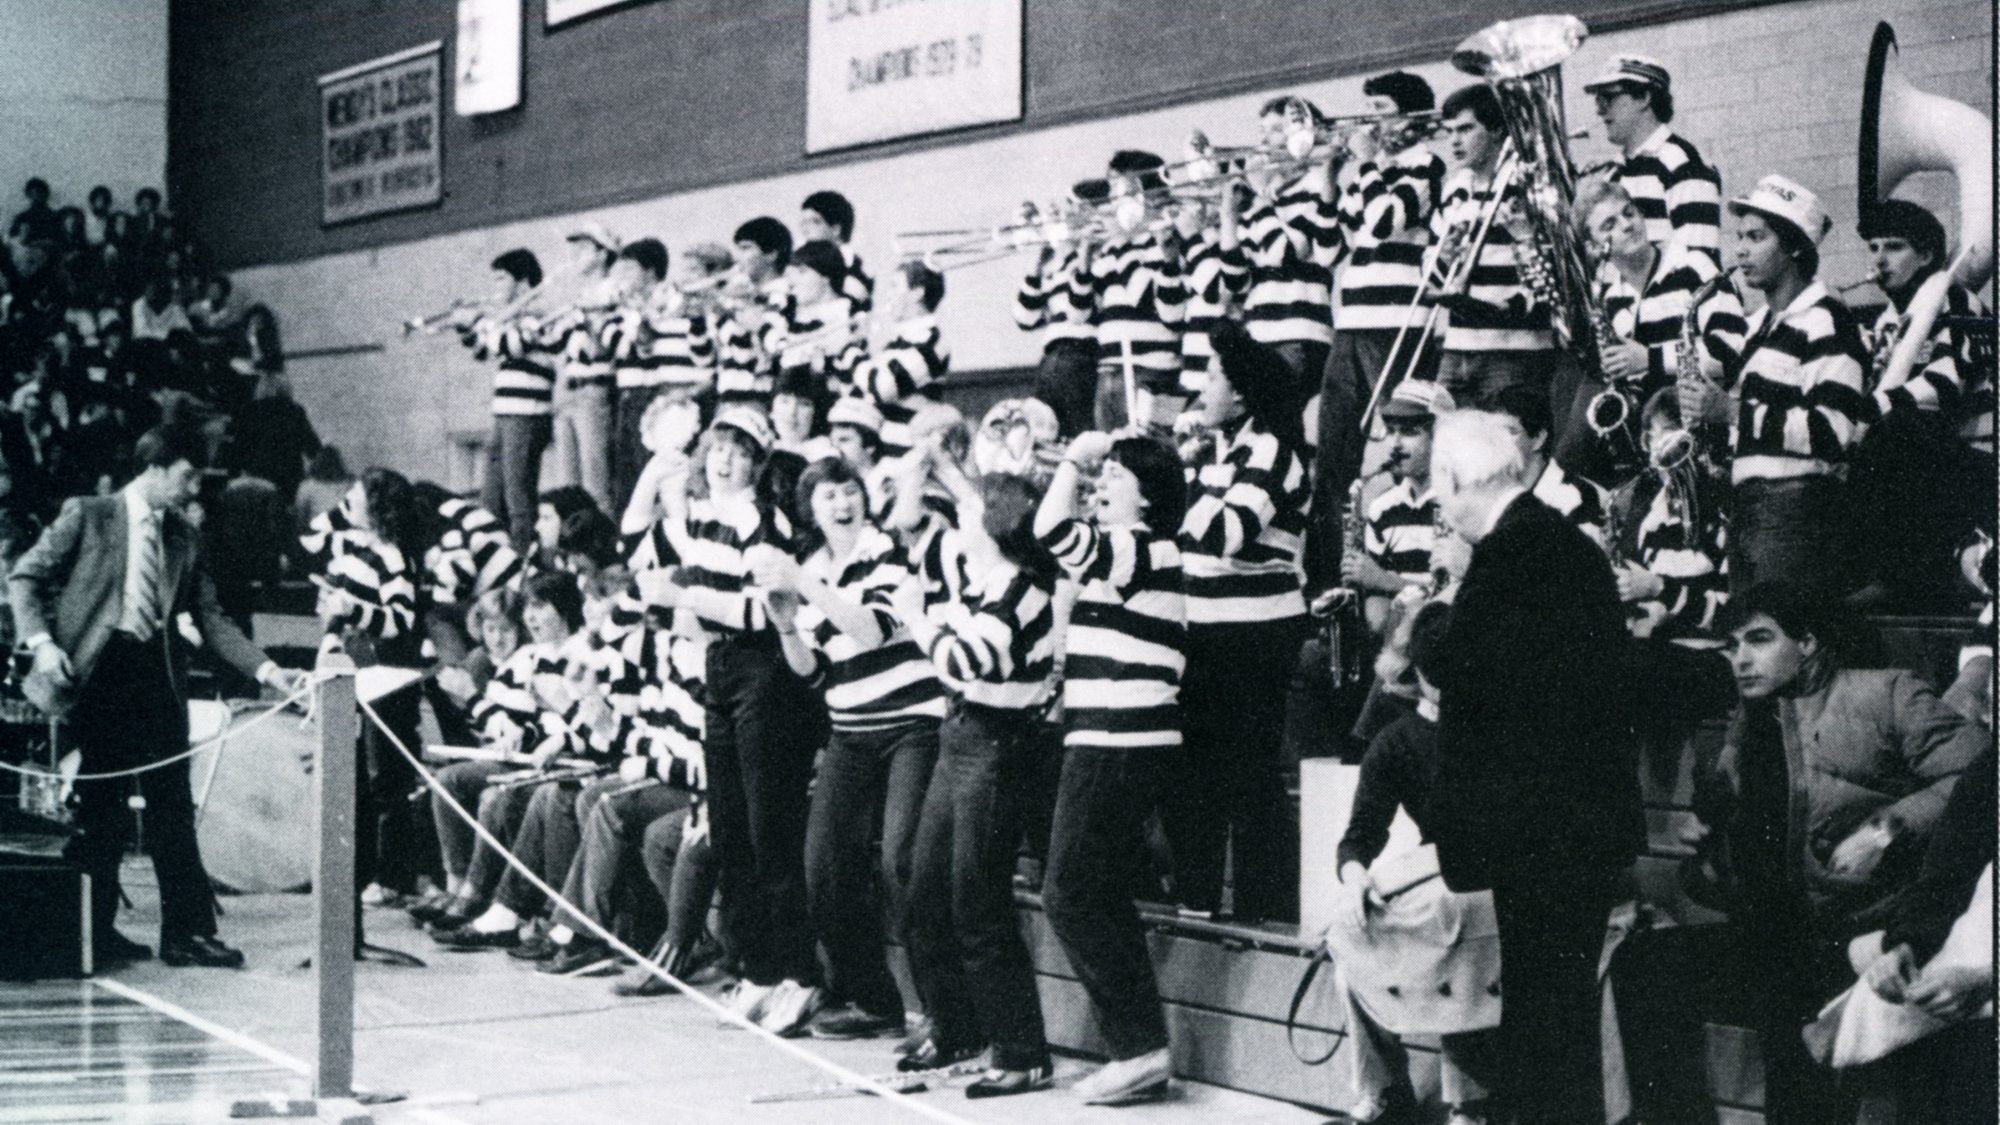 A black-and-white photo of the Pep Band, who are wearing striped long-sleeve shirts, standing on bleachers and cheering on a basketball game in 1984